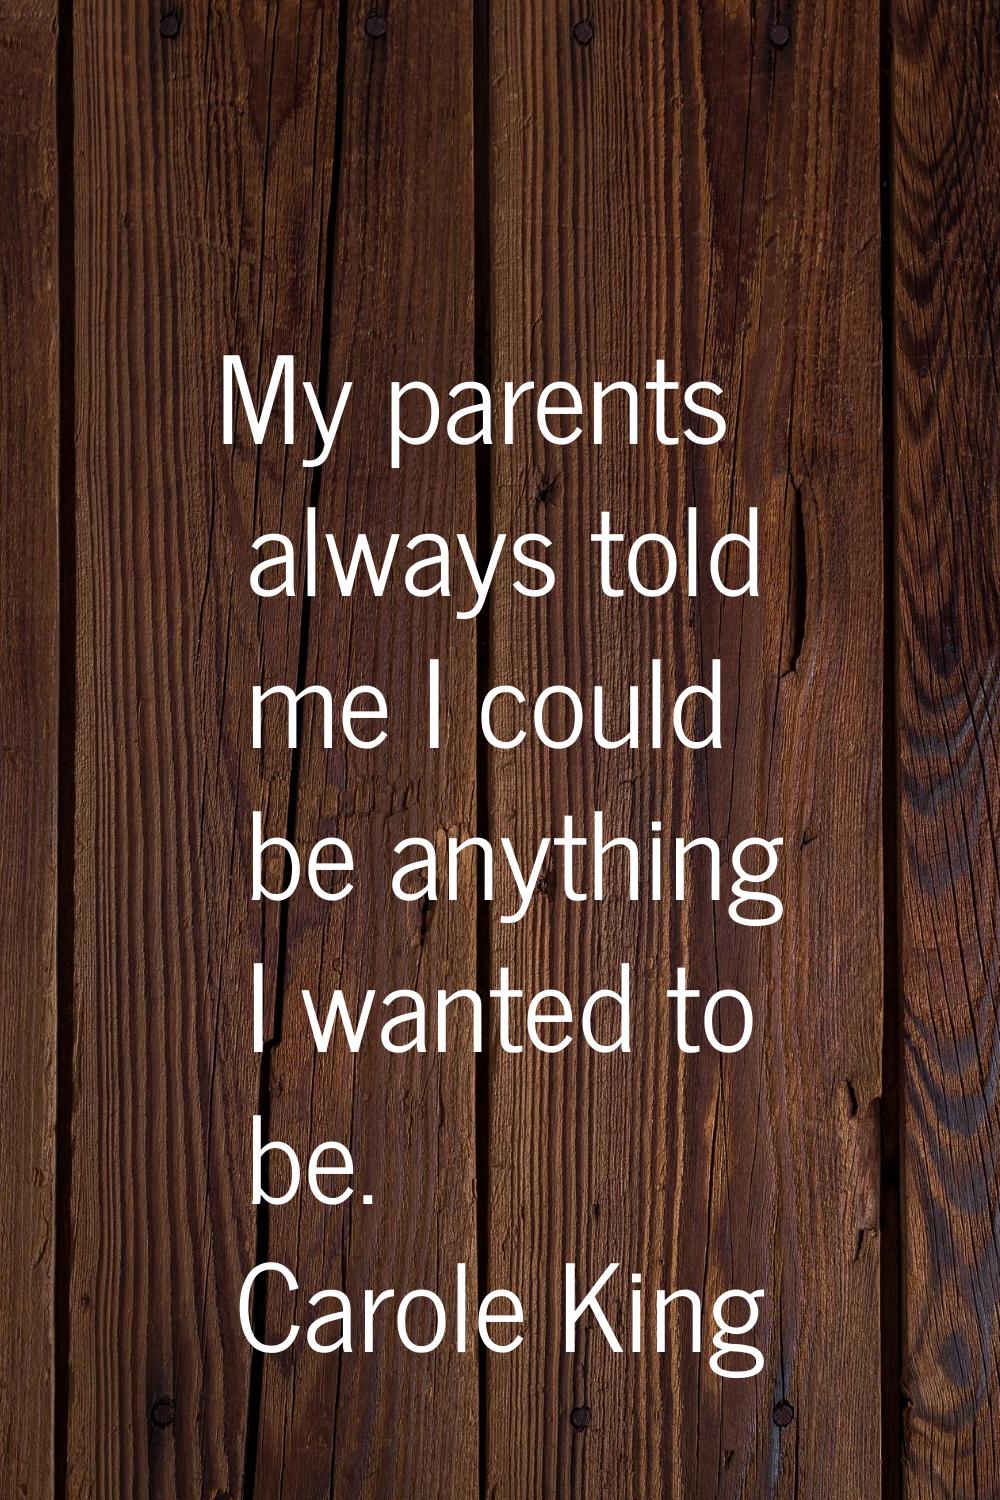 My parents always told me I could be anything I wanted to be.